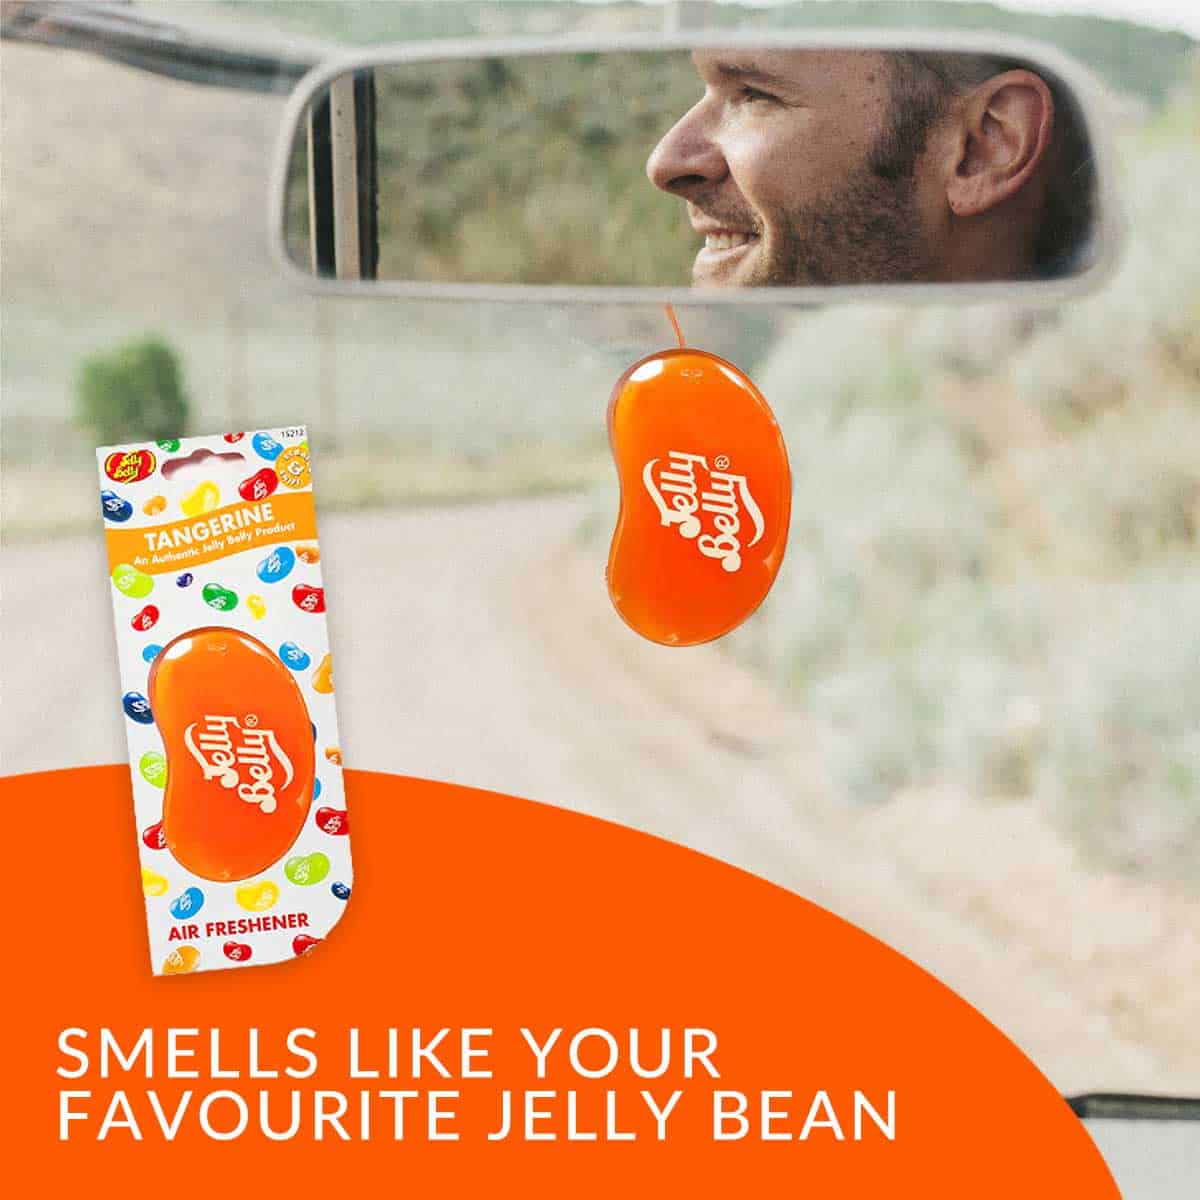 Super strong in the smell department! The Jelly Belly 3D Gel hanging car & home air freshener packs a punch when it comes to fragrance. Make your car journey or home more enjoyable with a scent just how you like it. IN CAR VIEW